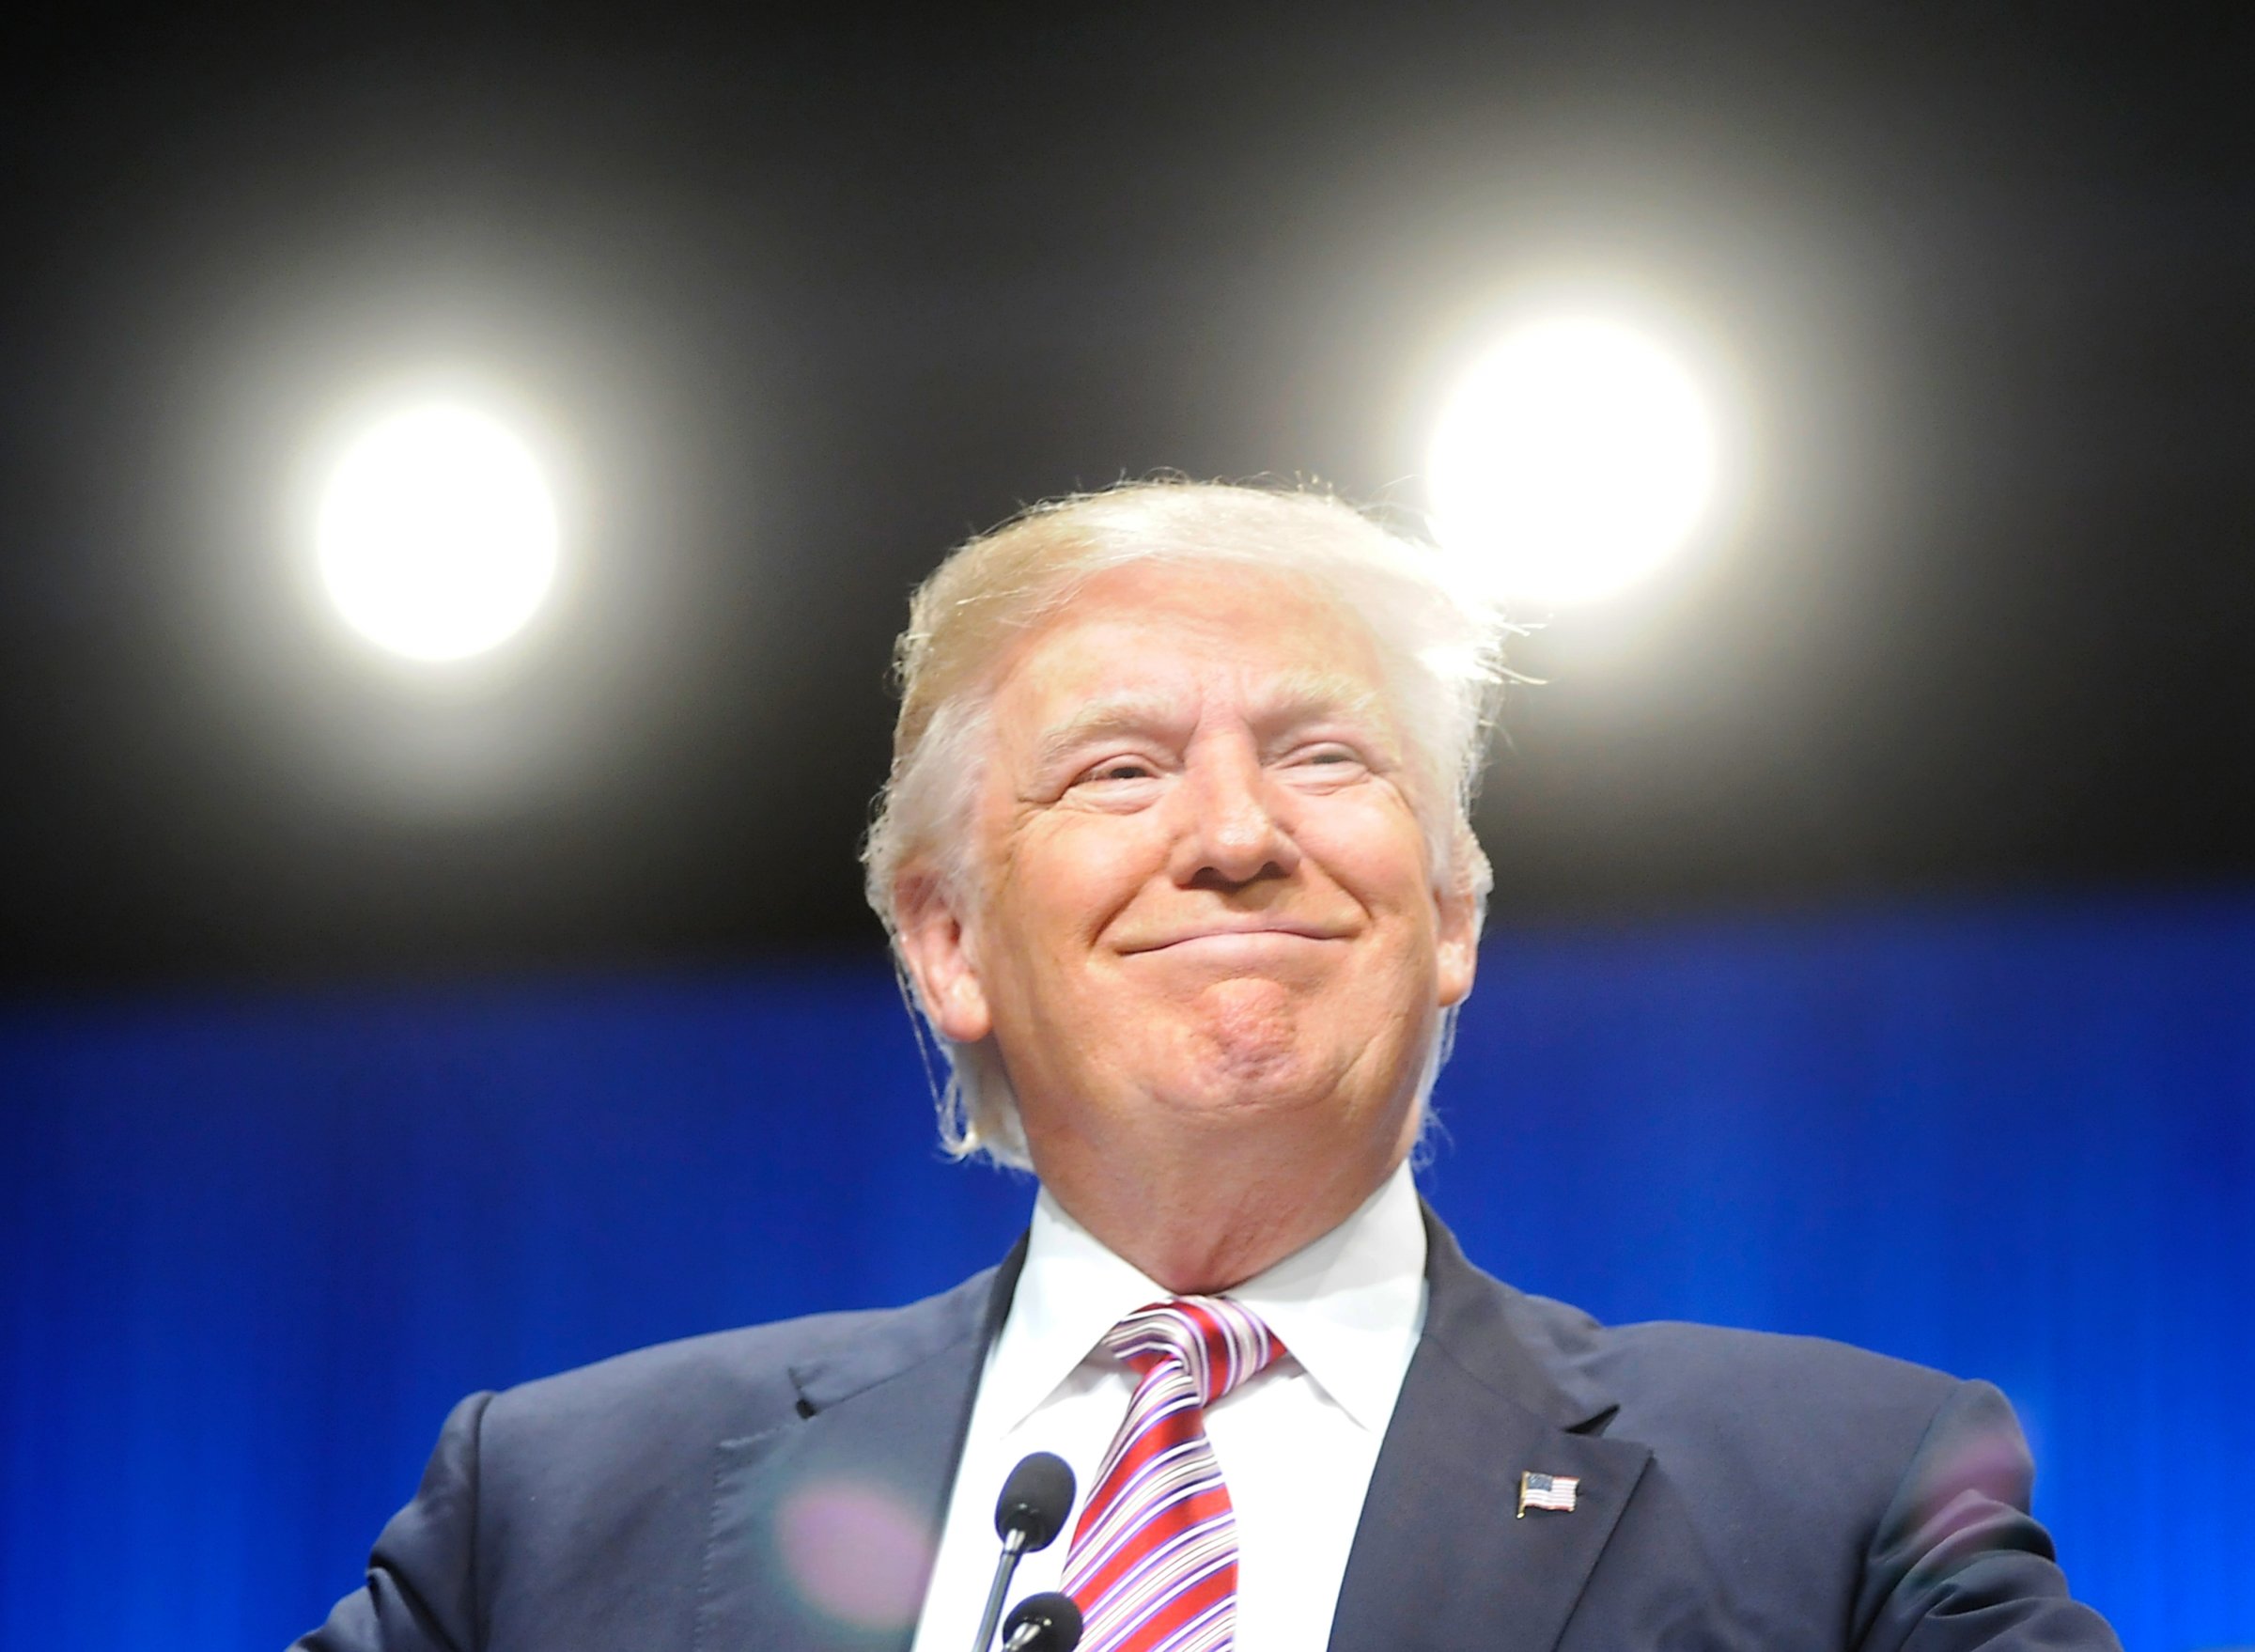 Donald Trump by Sara D. Davis/Getty Images (Business Insider)